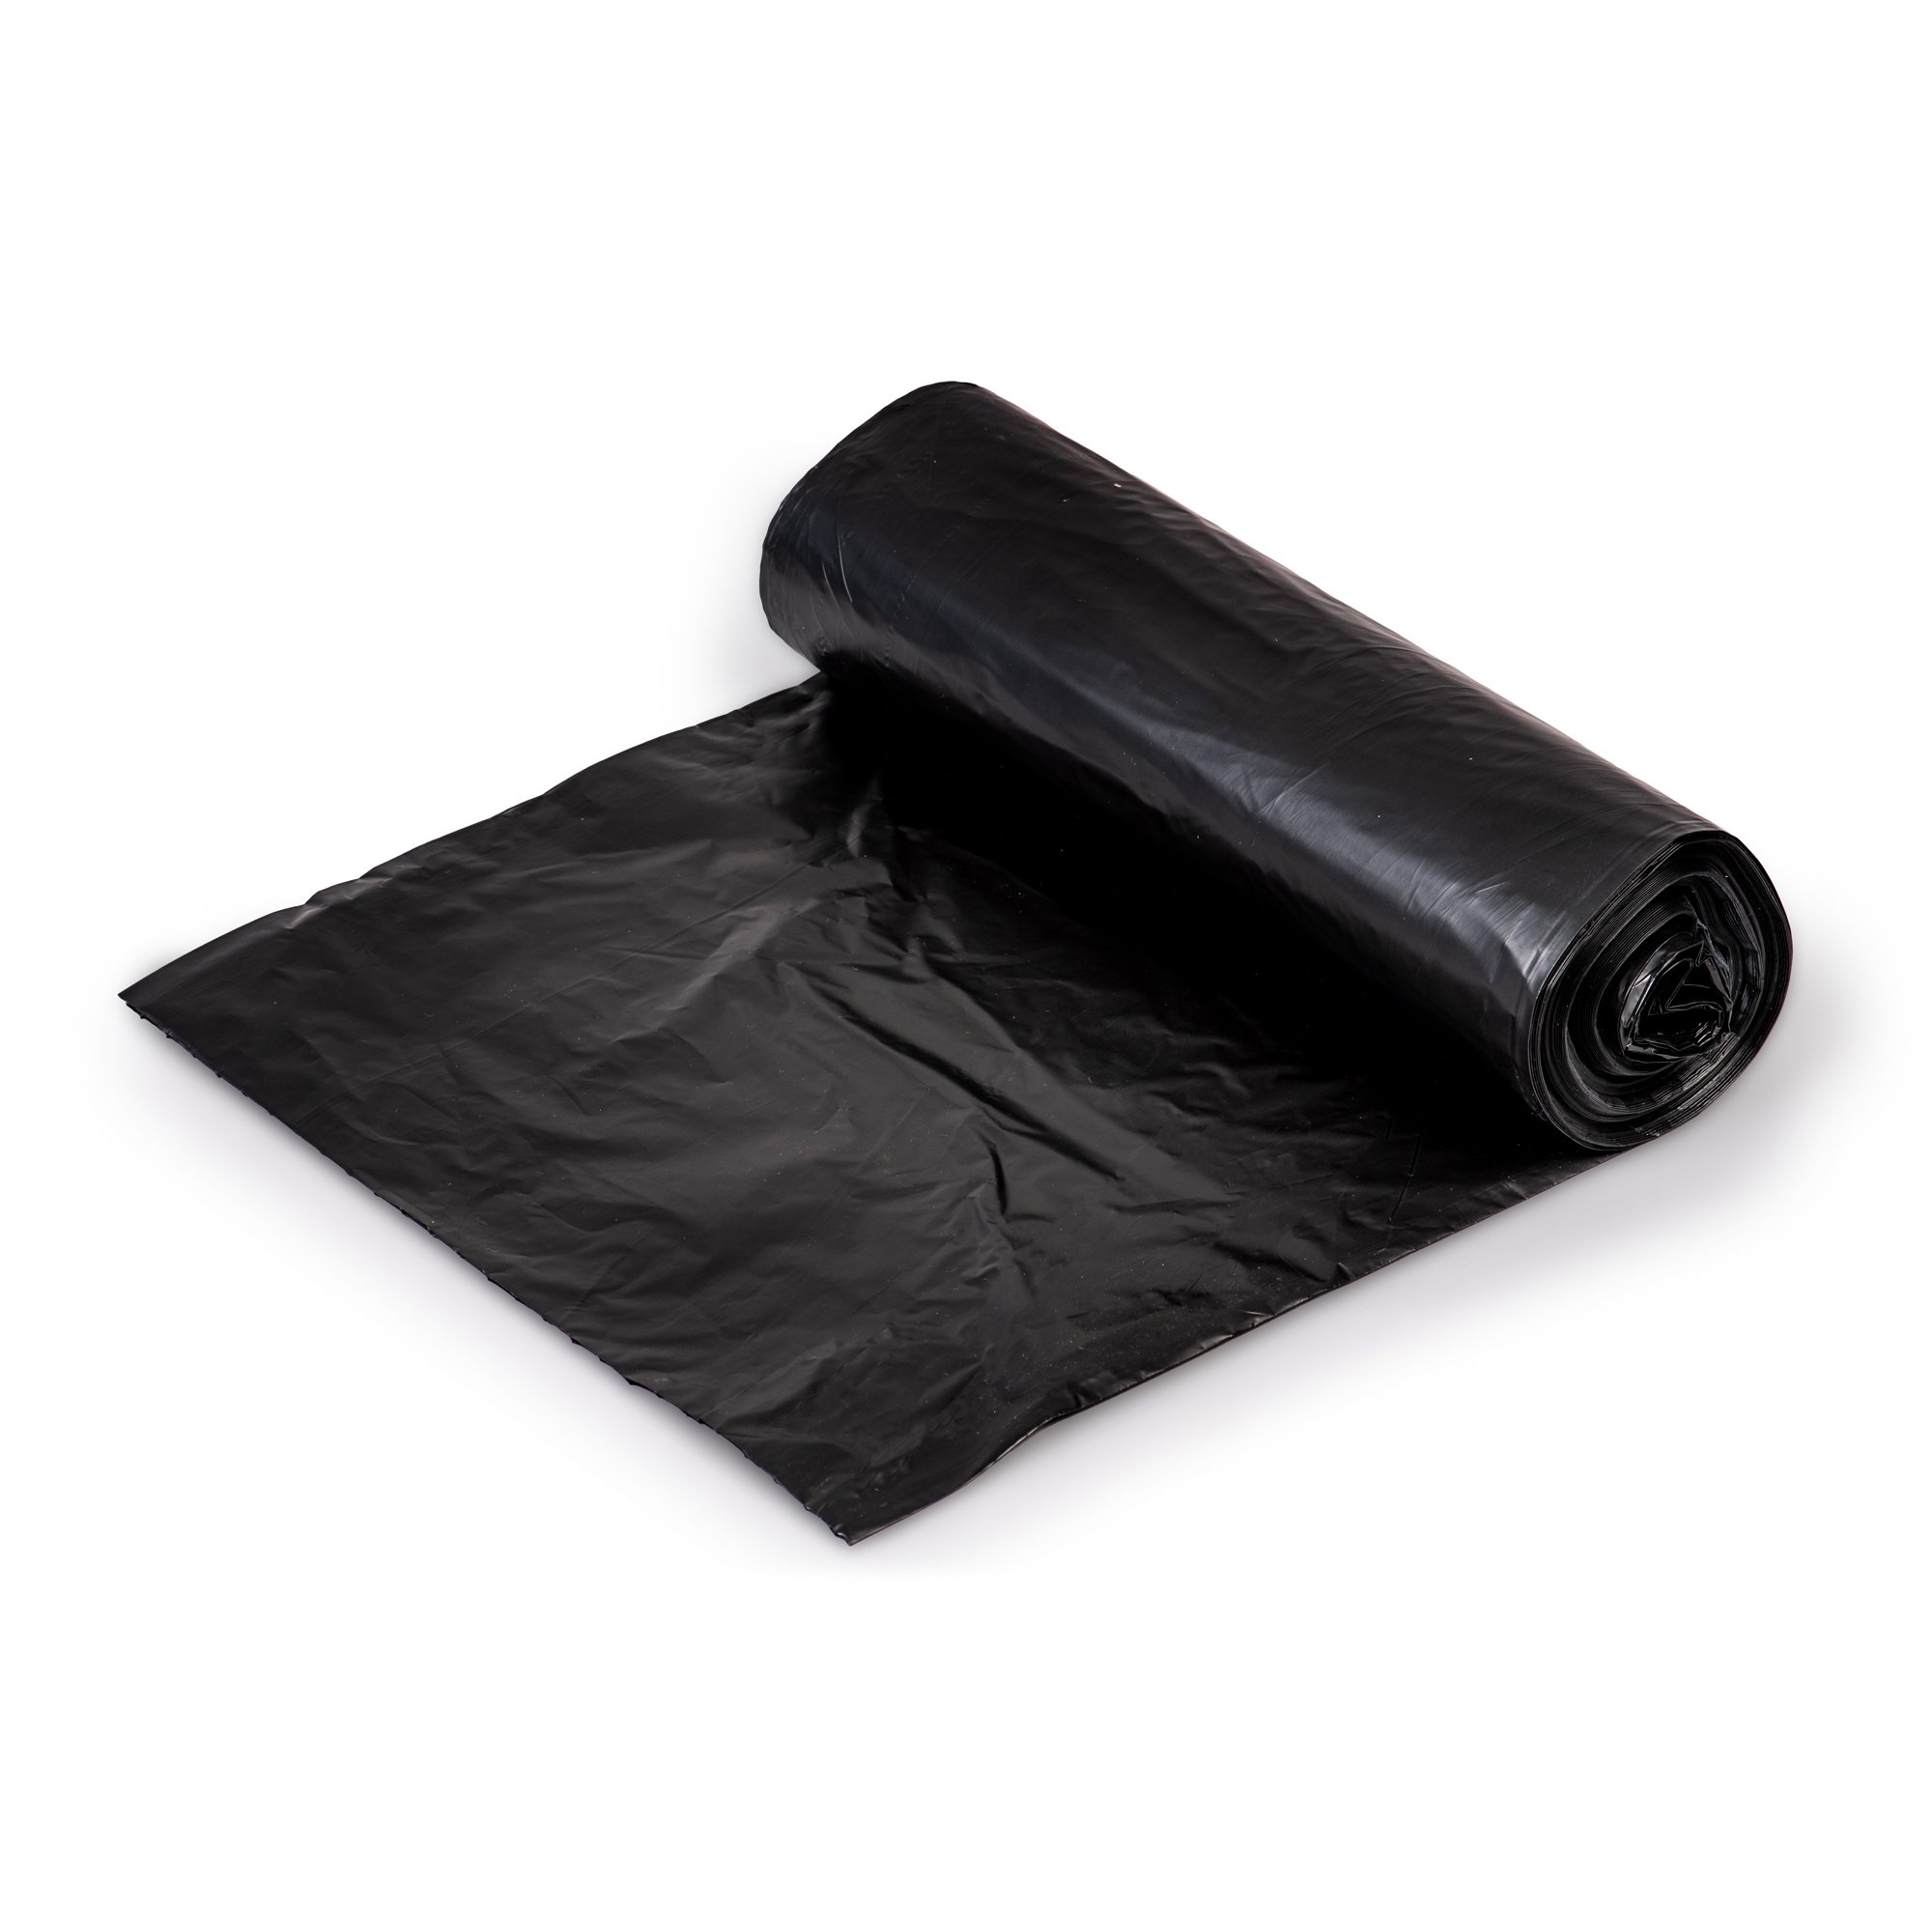 CLASSIC BLACK GARBAGE BAGS XL – Parex Official Website